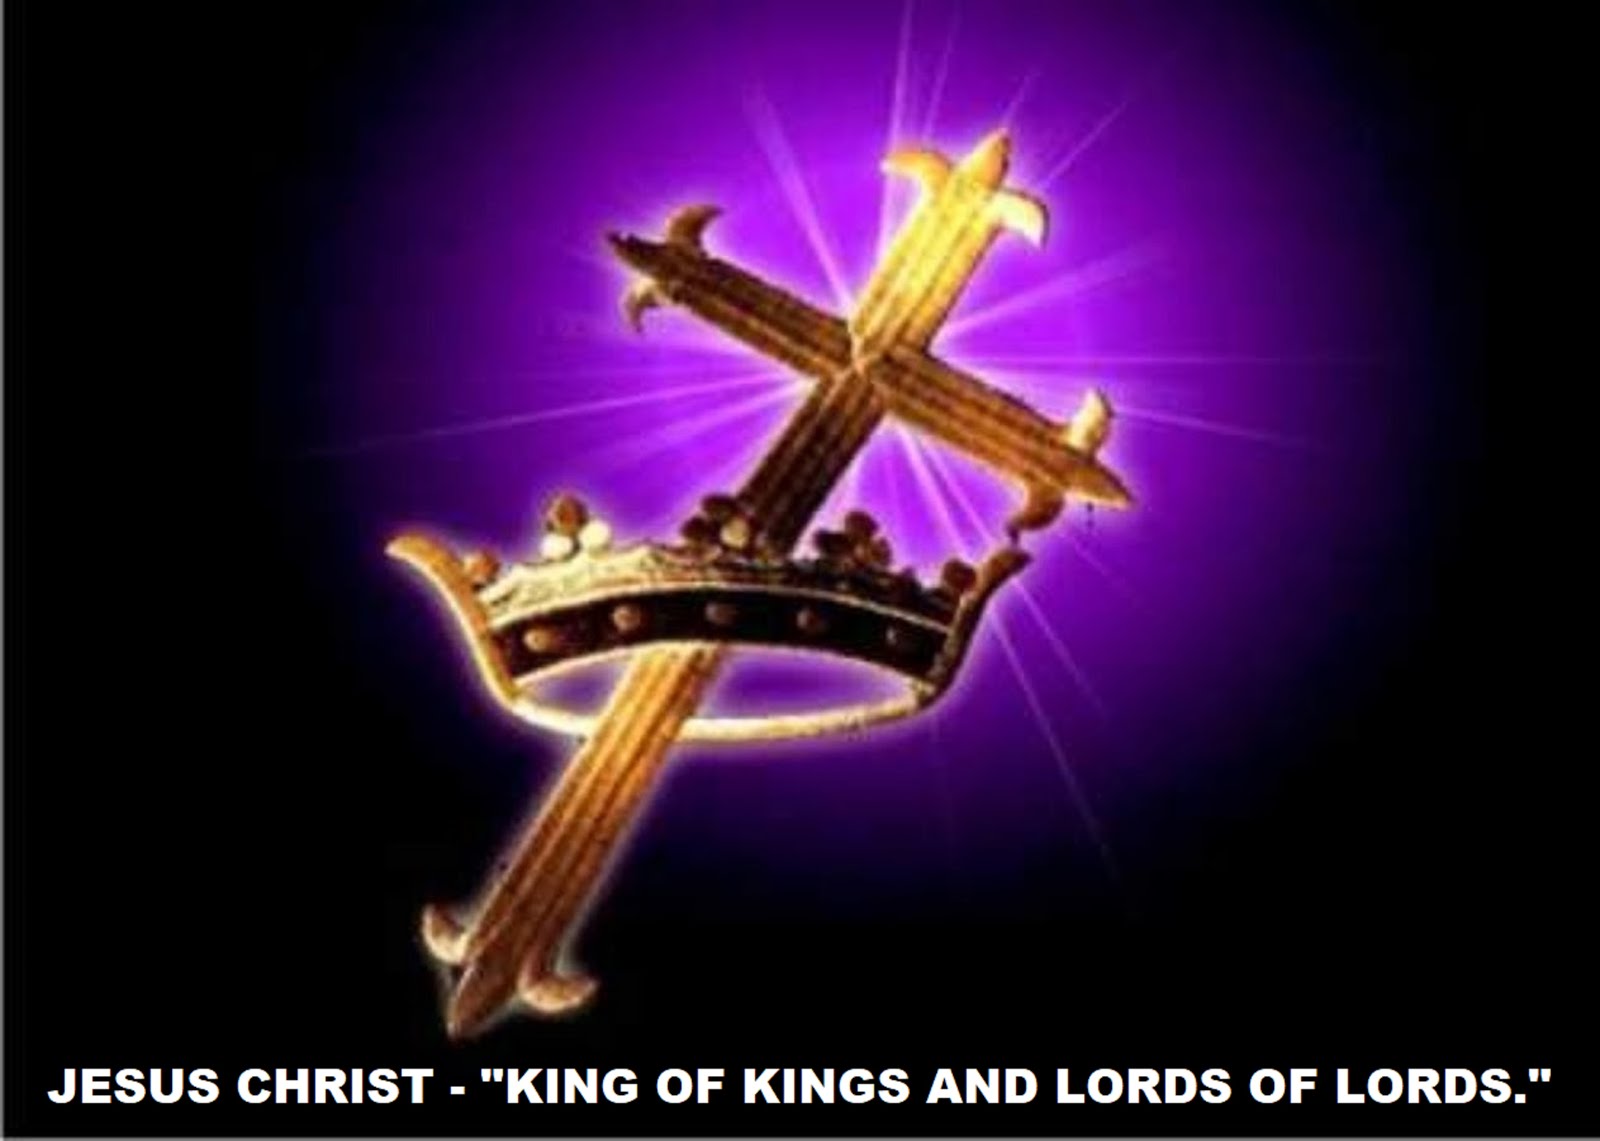 JESUS CHRIST - "KING OF KINGS AND LORD OF LORDS."